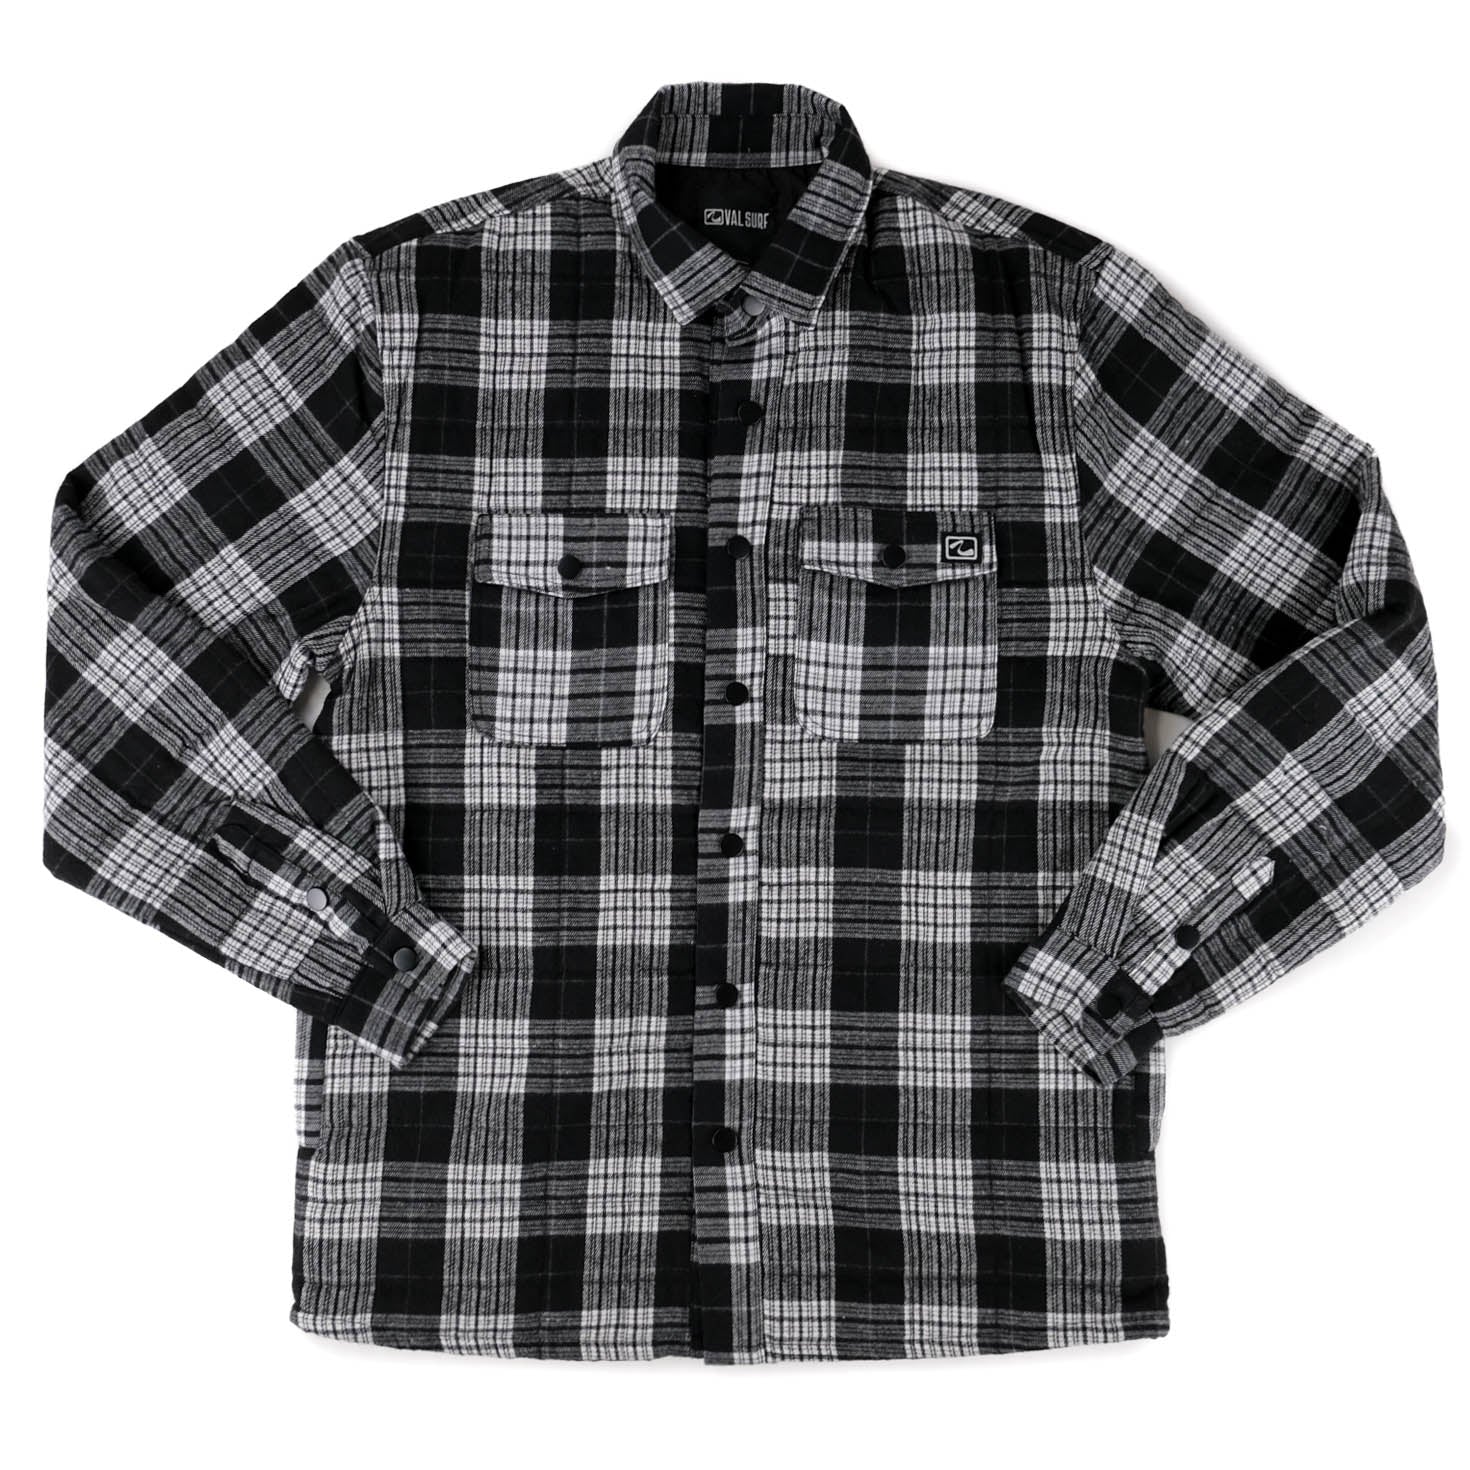 Barstow Flannel Jacket - Black